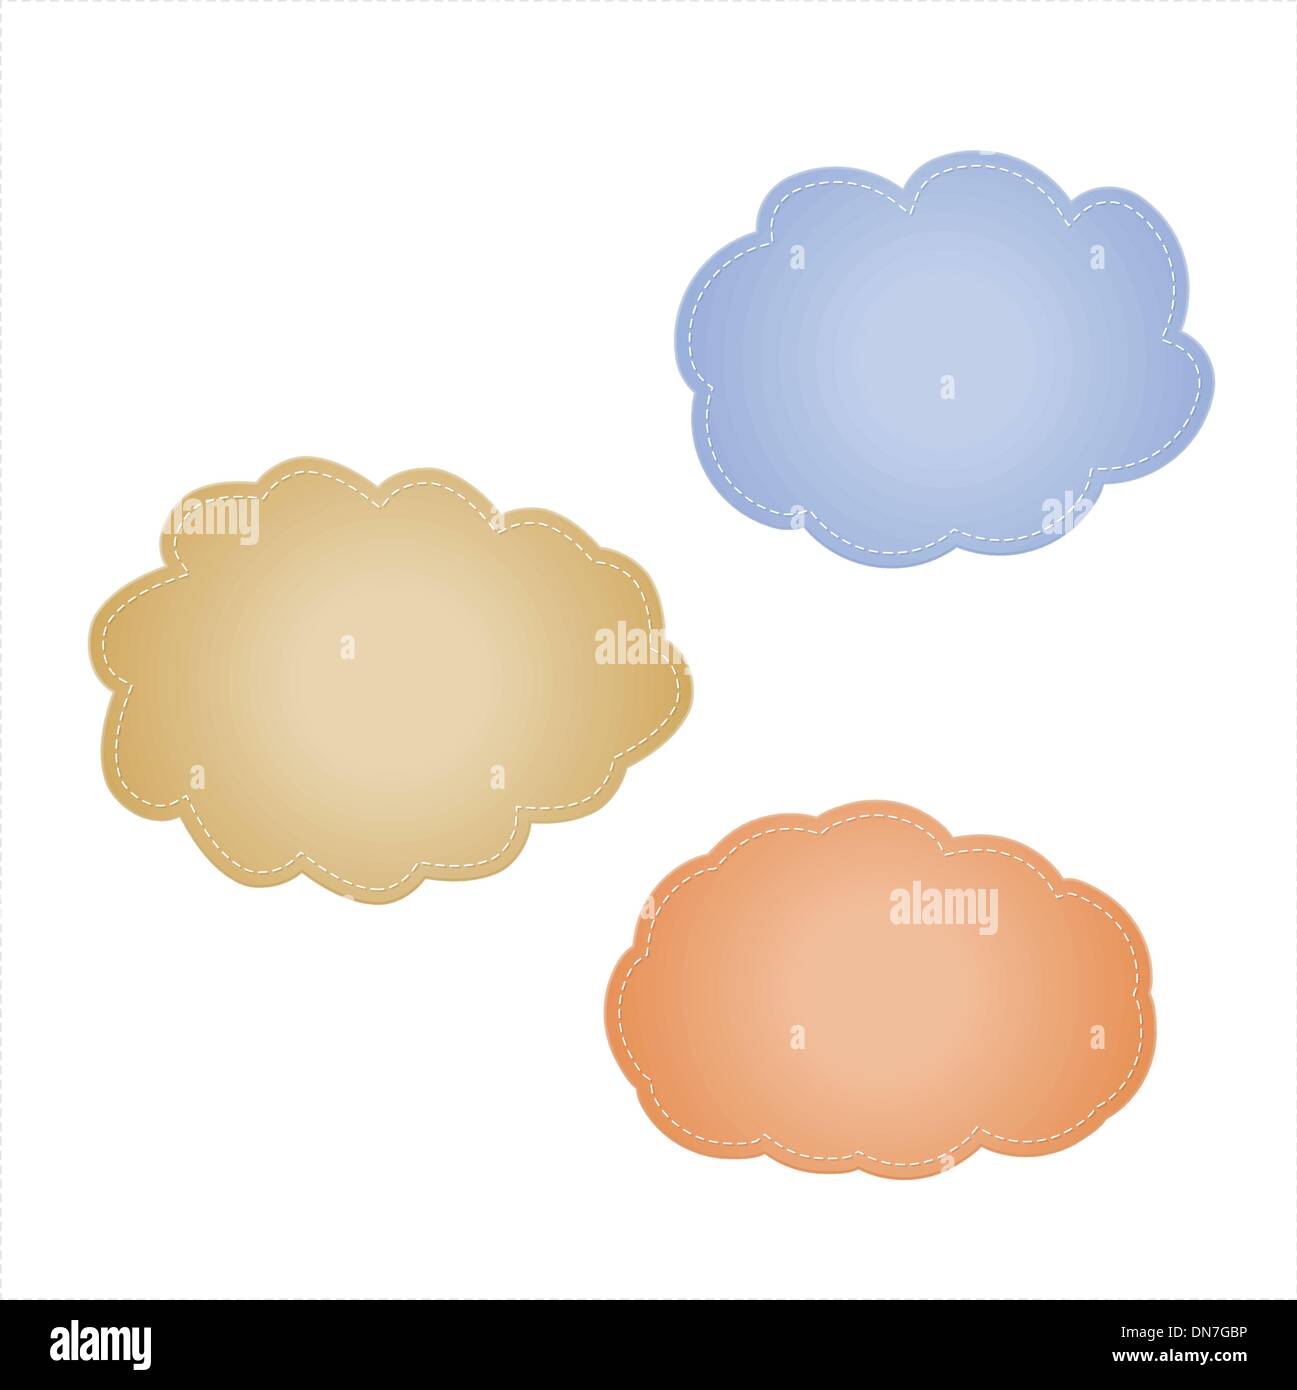 The cloud style label Stock Vector